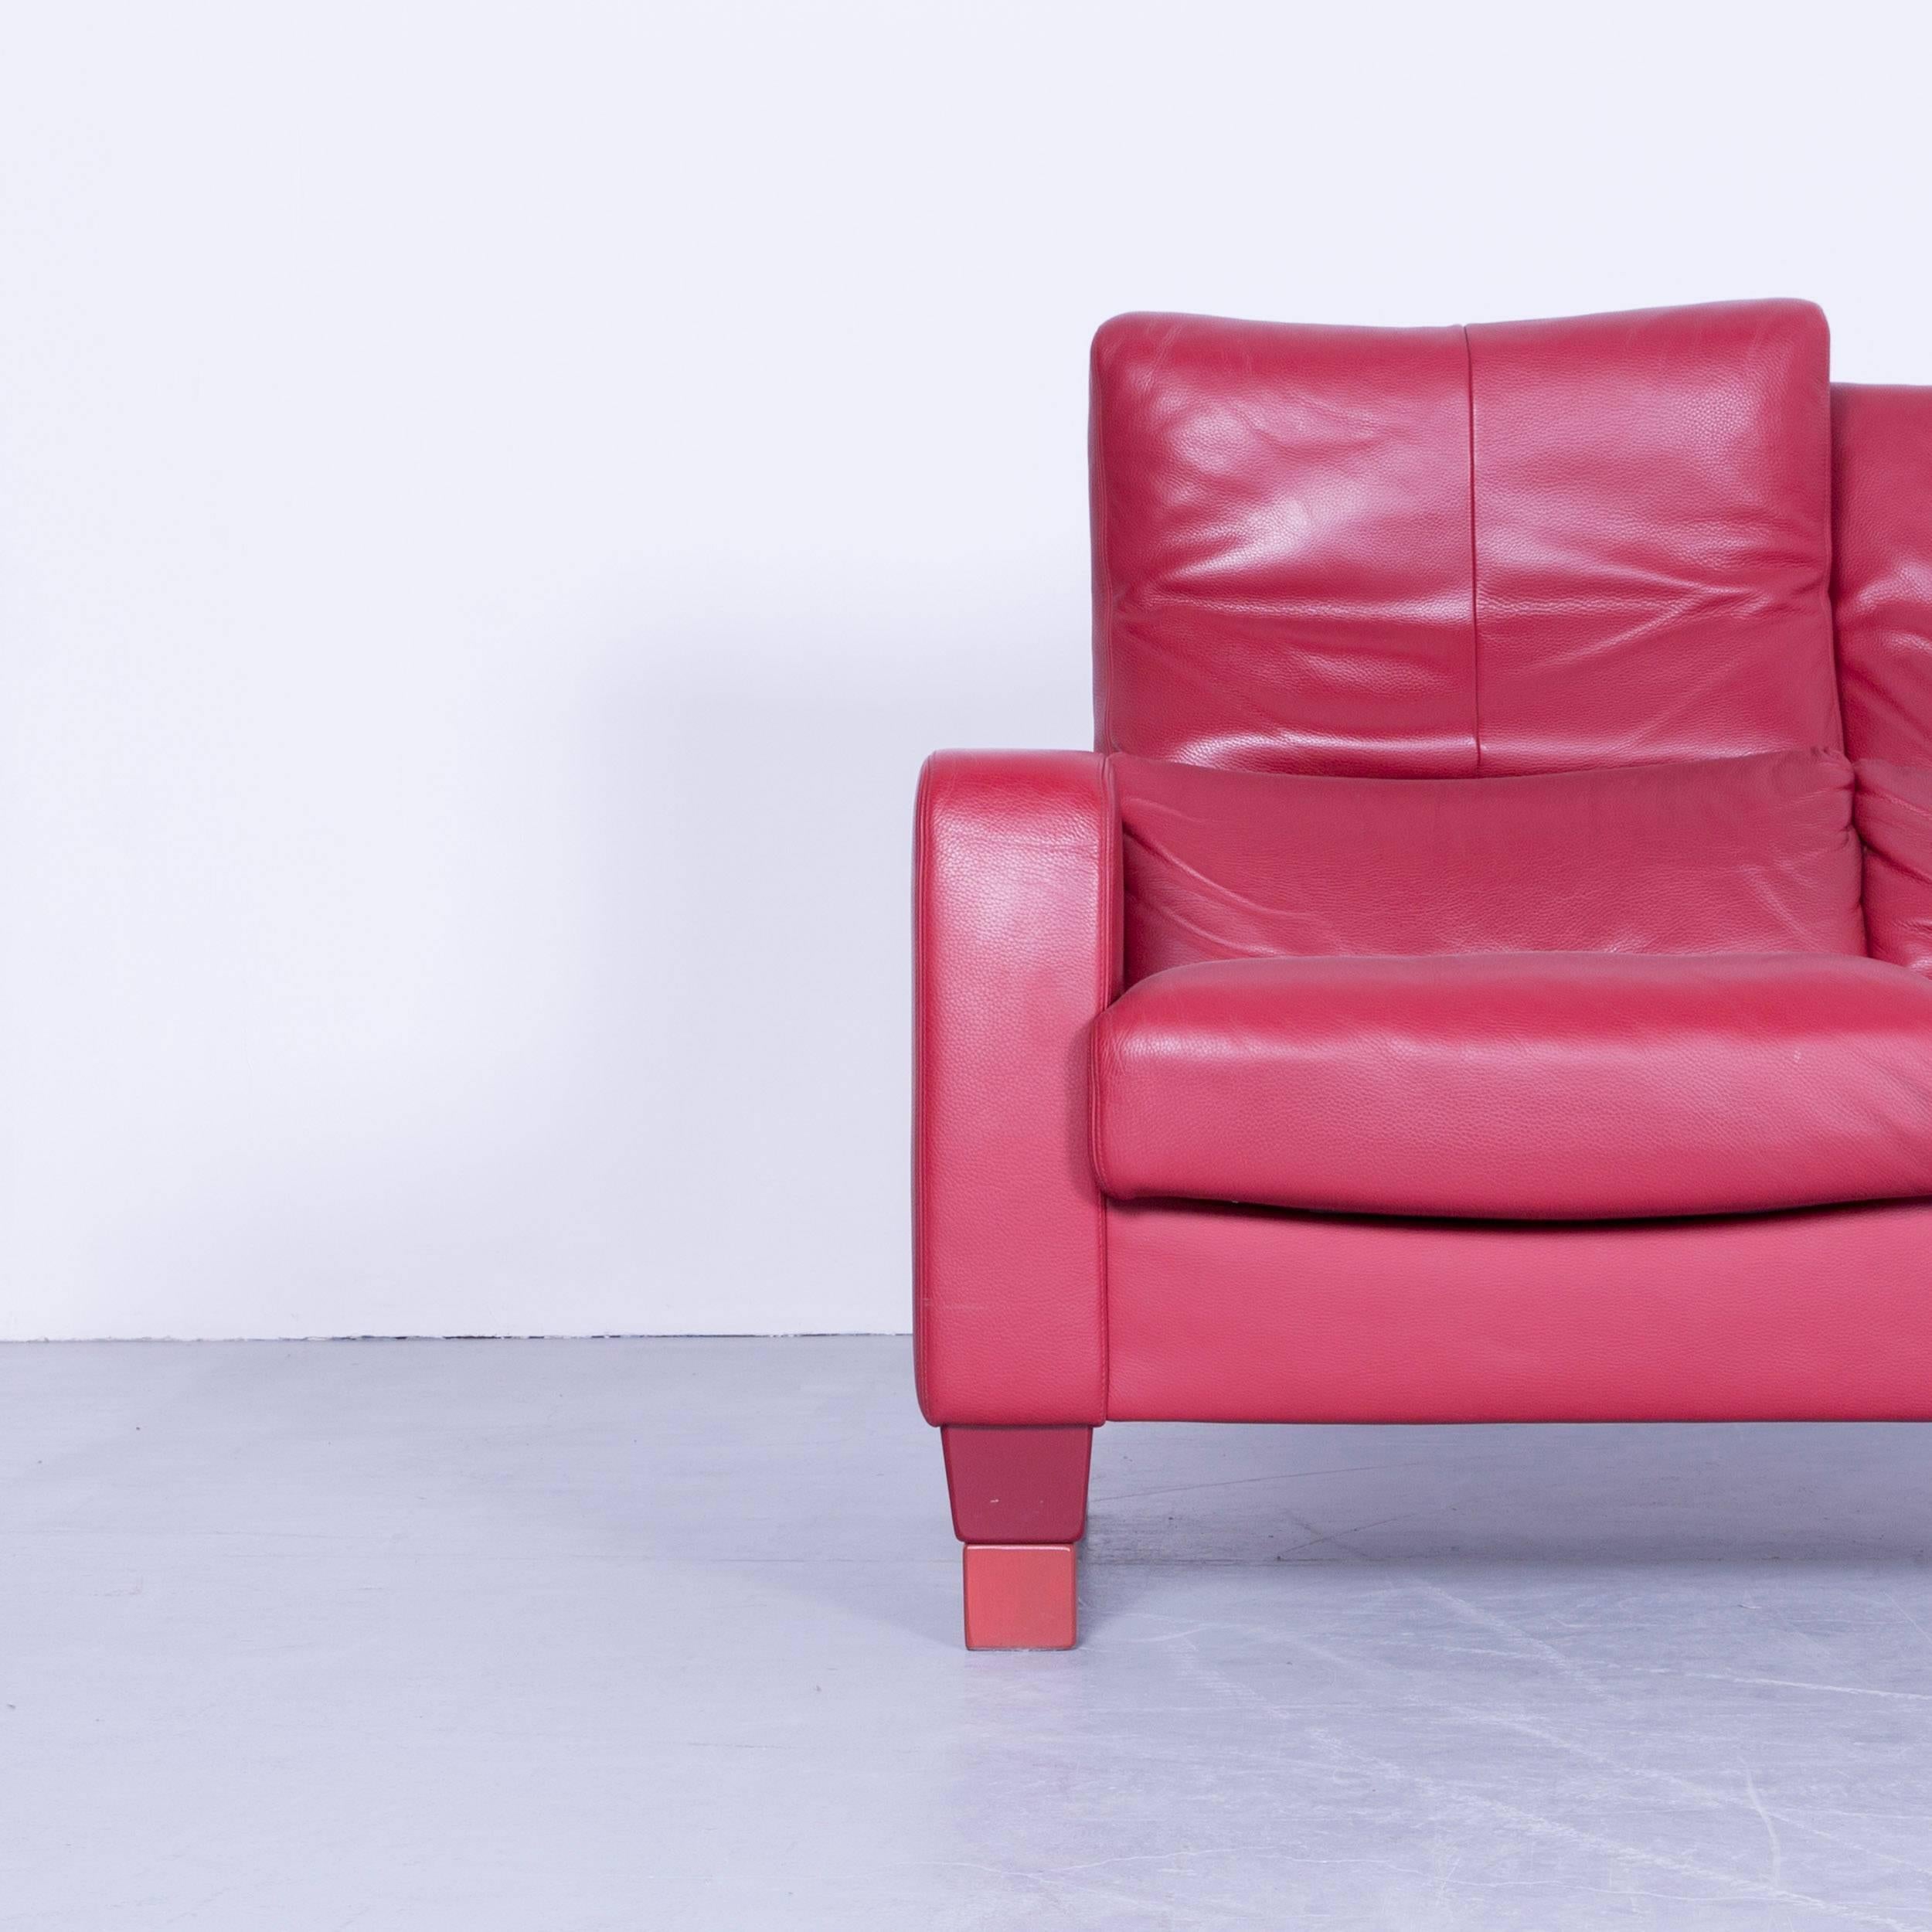 We offer delivery options to most destinations on earth. Find our shipping quotes at the bottom of this page in the shipping section.

An Erpo Designer Sofa Leather Red Two-Seater Couch Modern Recline Function

Shipping:

An on point shipping